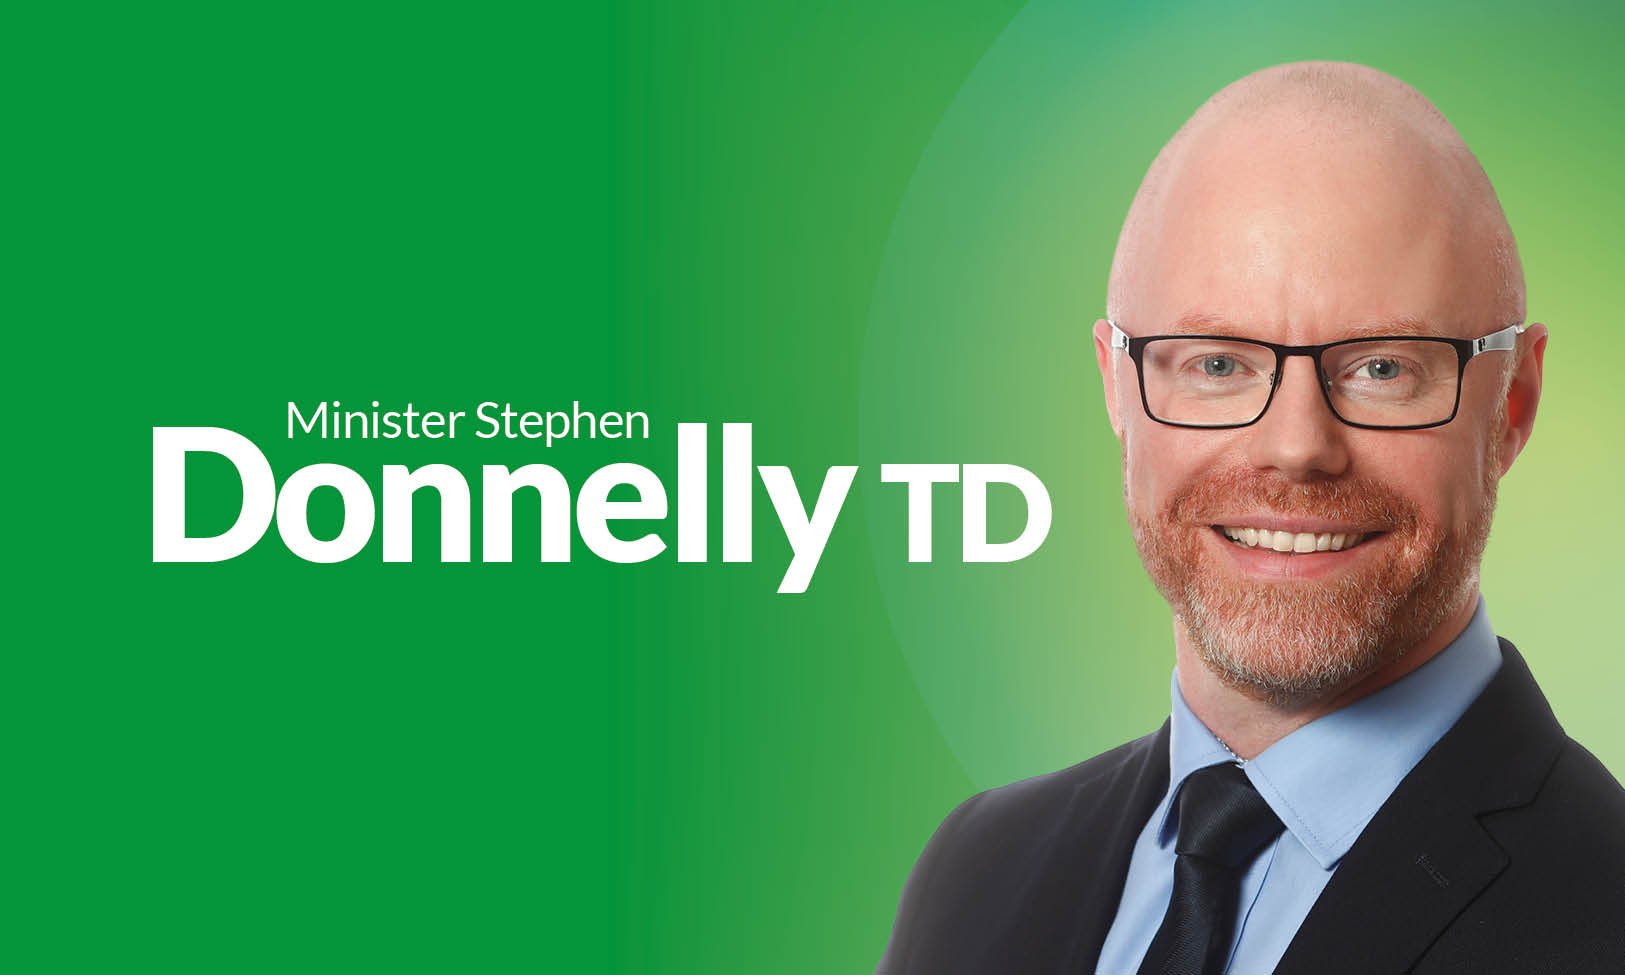 Minister Donnelly publishes the General Scheme of the Health (Exemption for Children from Public In-Patient Charges) Bill 2022